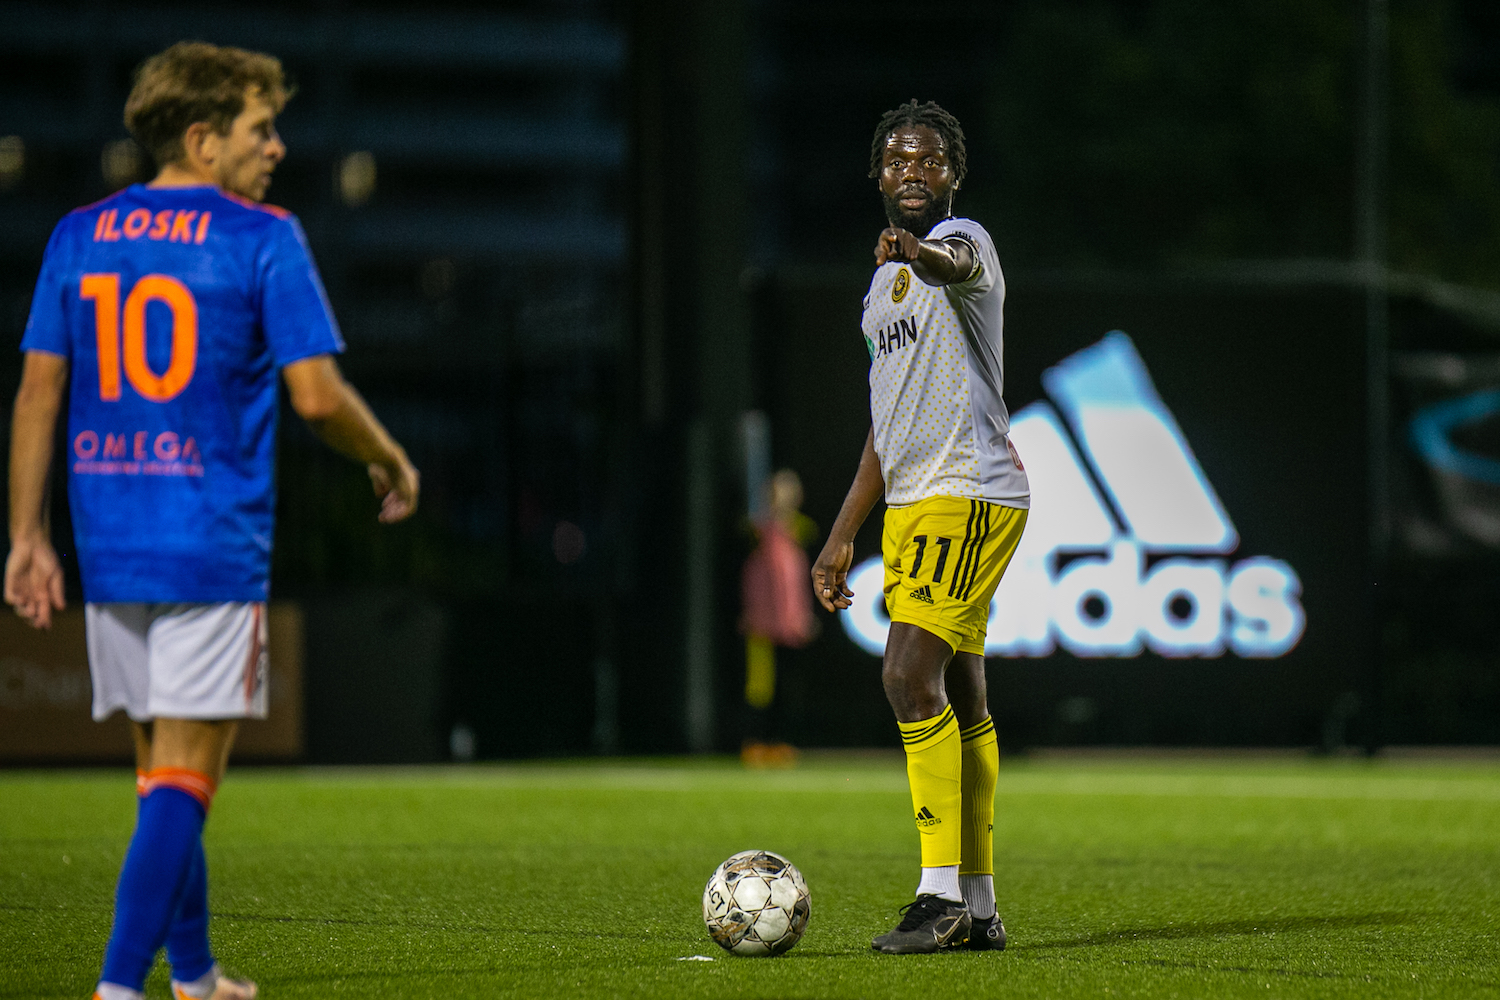 Kenardo Forbes points as Orange County's Milan Iloski positions himself to defend a free kick in the Riverhounds' 1-1 draw on Sept. 24, 2022 at Highmark Stadium.